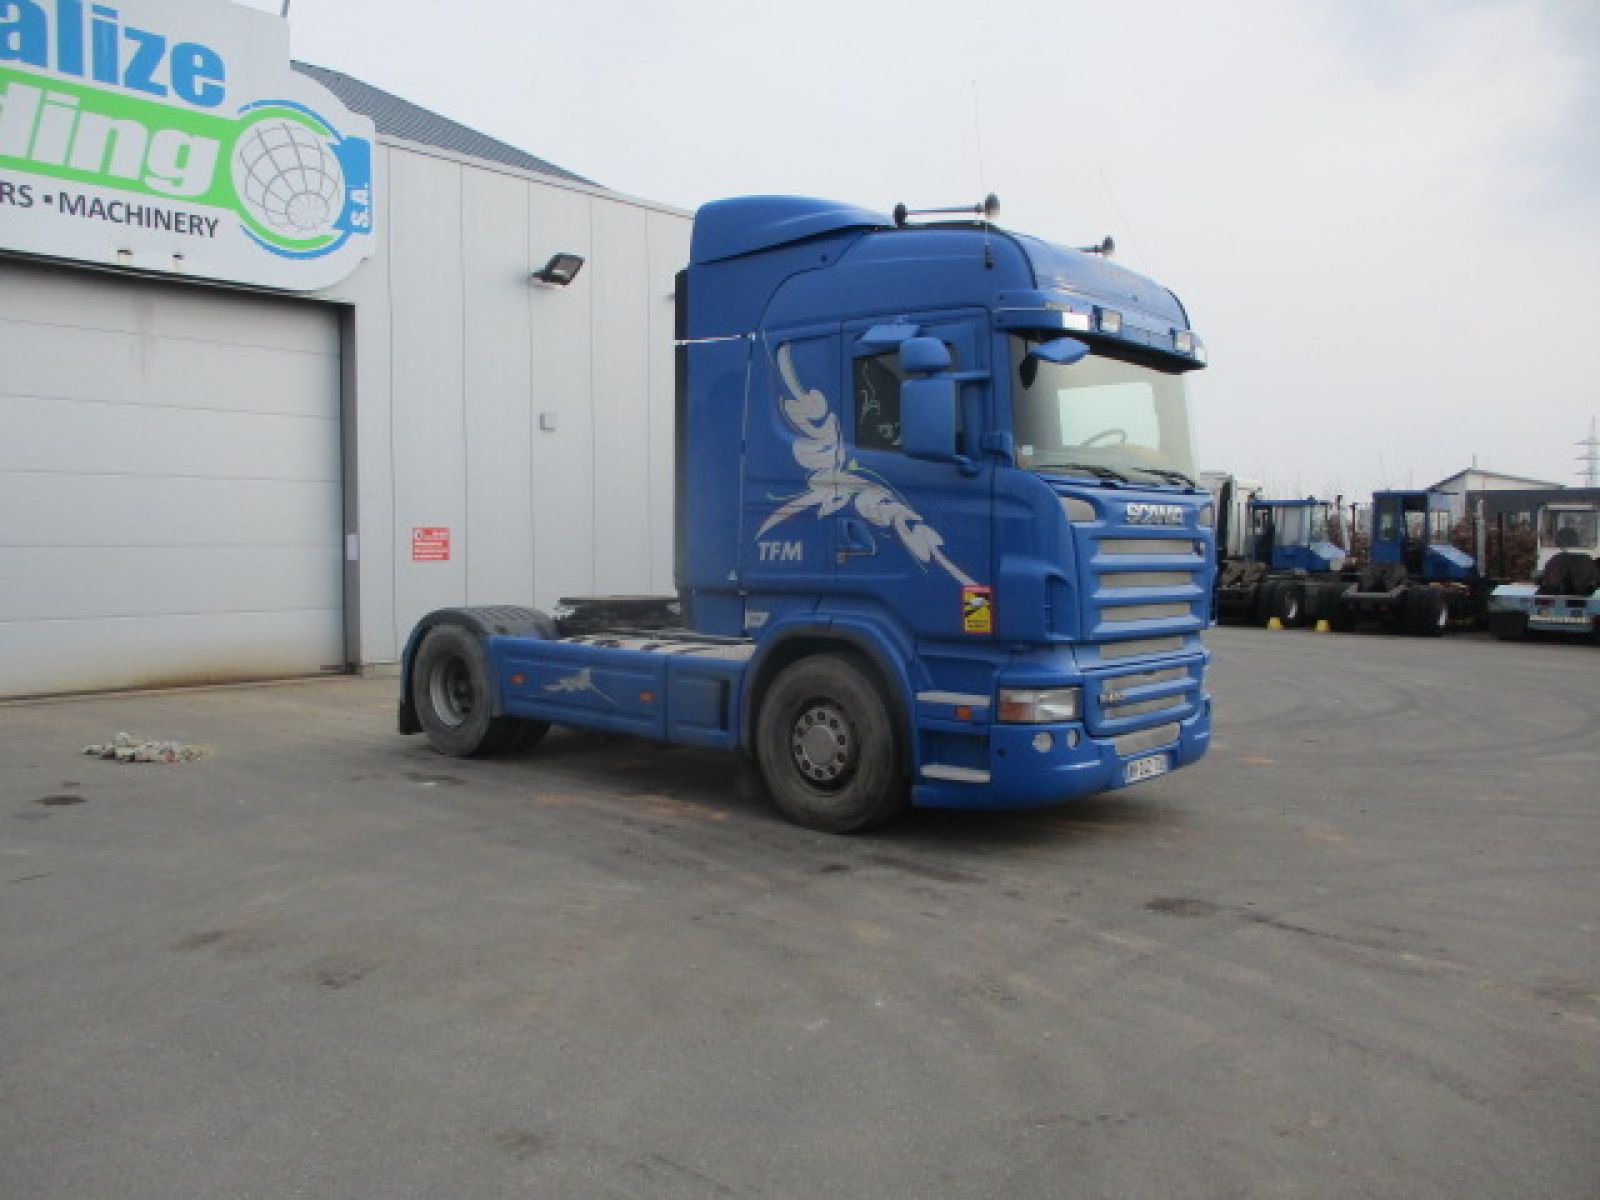 Vente occasion  Tracteur - SCANIA R480  TRACTEUR (Belgique - Europe) - Houffalize Trading s.a.